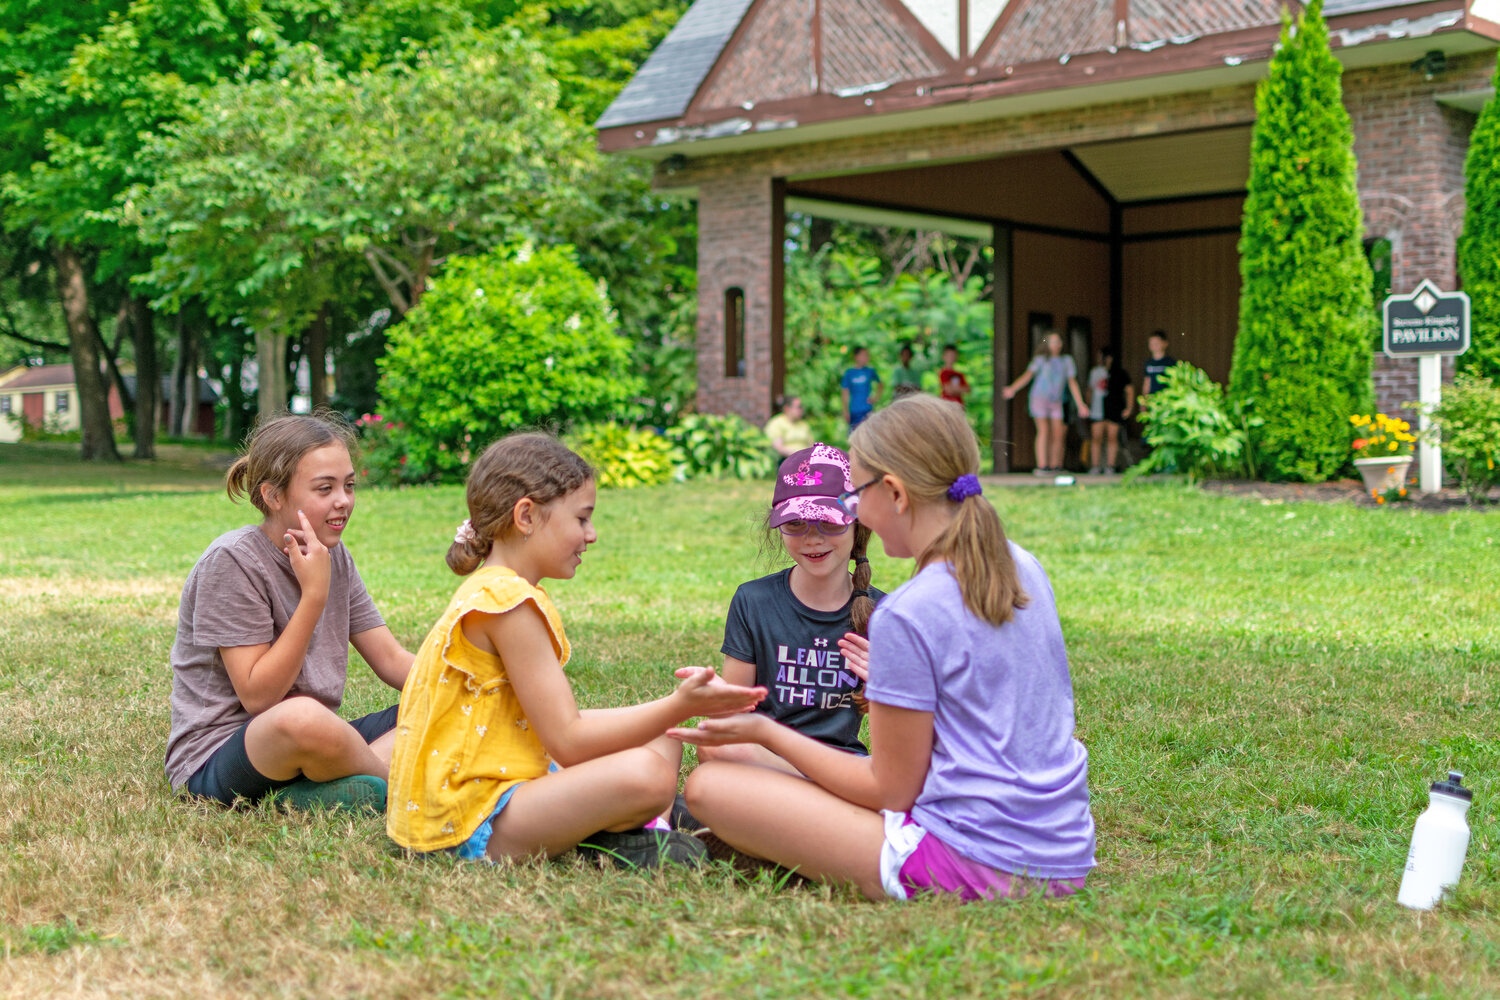 Attendees enjoy some outdoor fun at the RACC’s Artletics Summer Camp. This year the camp is planned for June 26-Aug. 17 (Monday-Thursday, 8 week program, 9 a.m. to 3 p.m.).